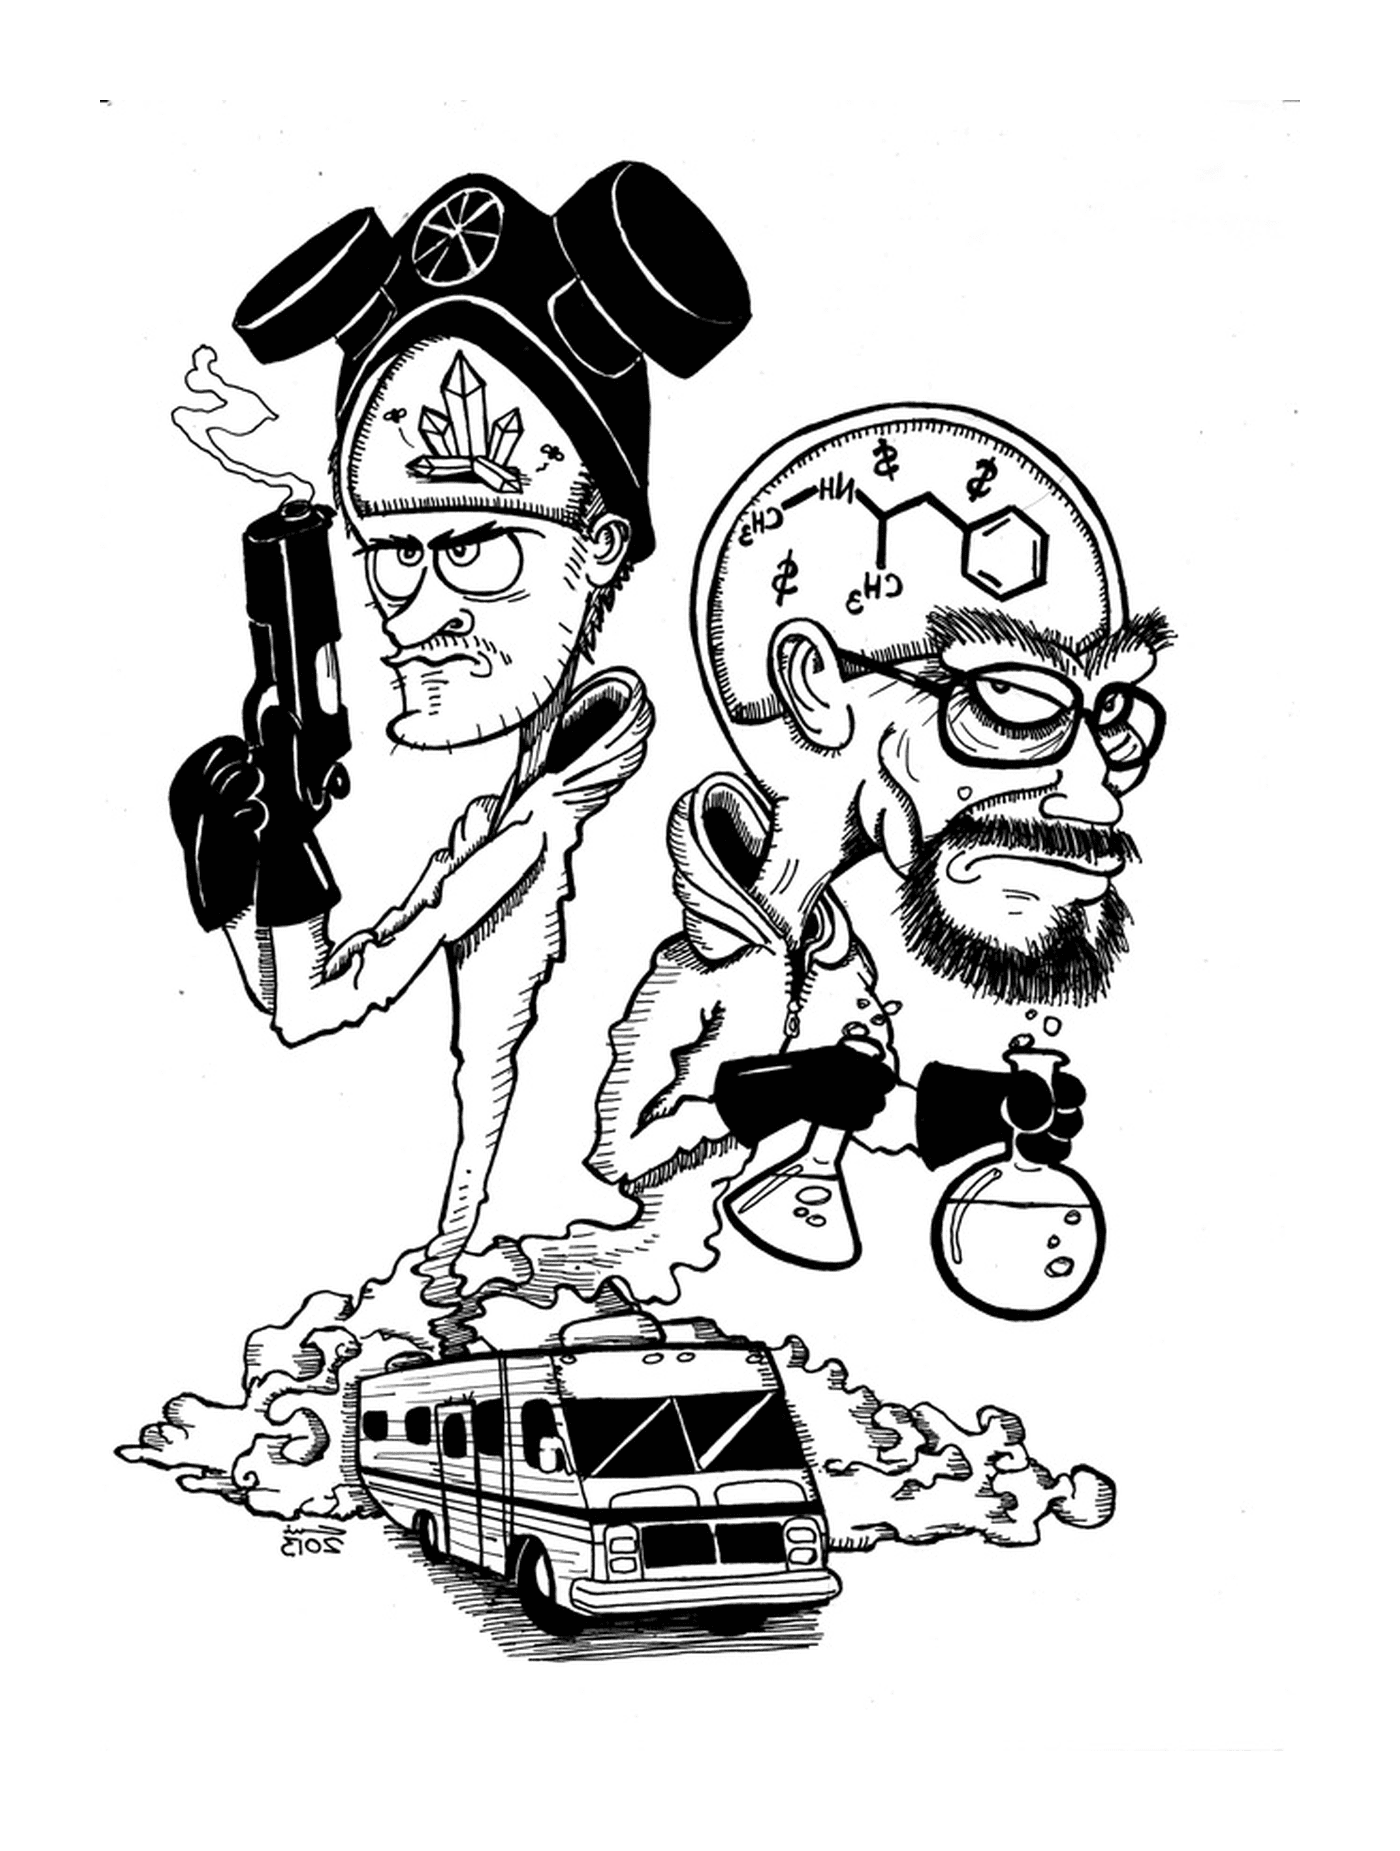 breaking bad by camikaze